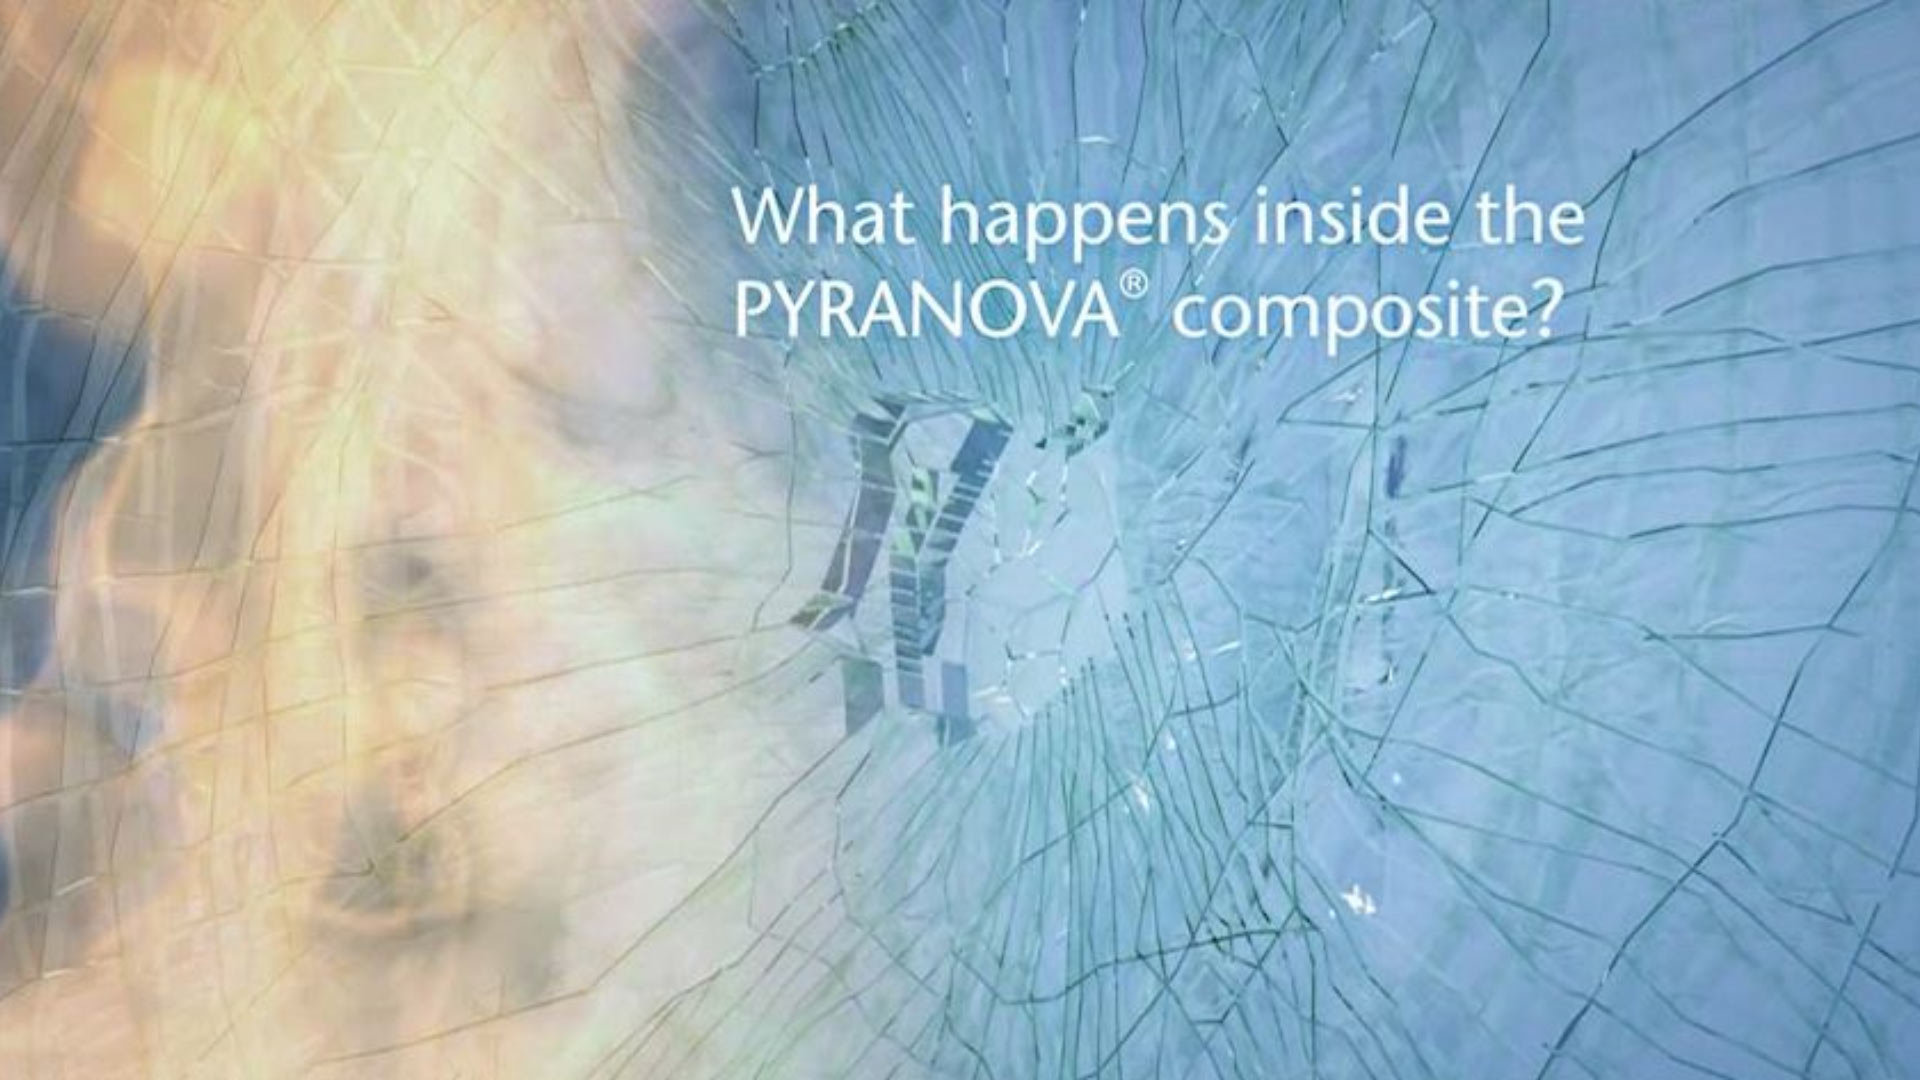 Video showing how PYRANOVA® secure safety glass offers protection against fire, impact and bullets